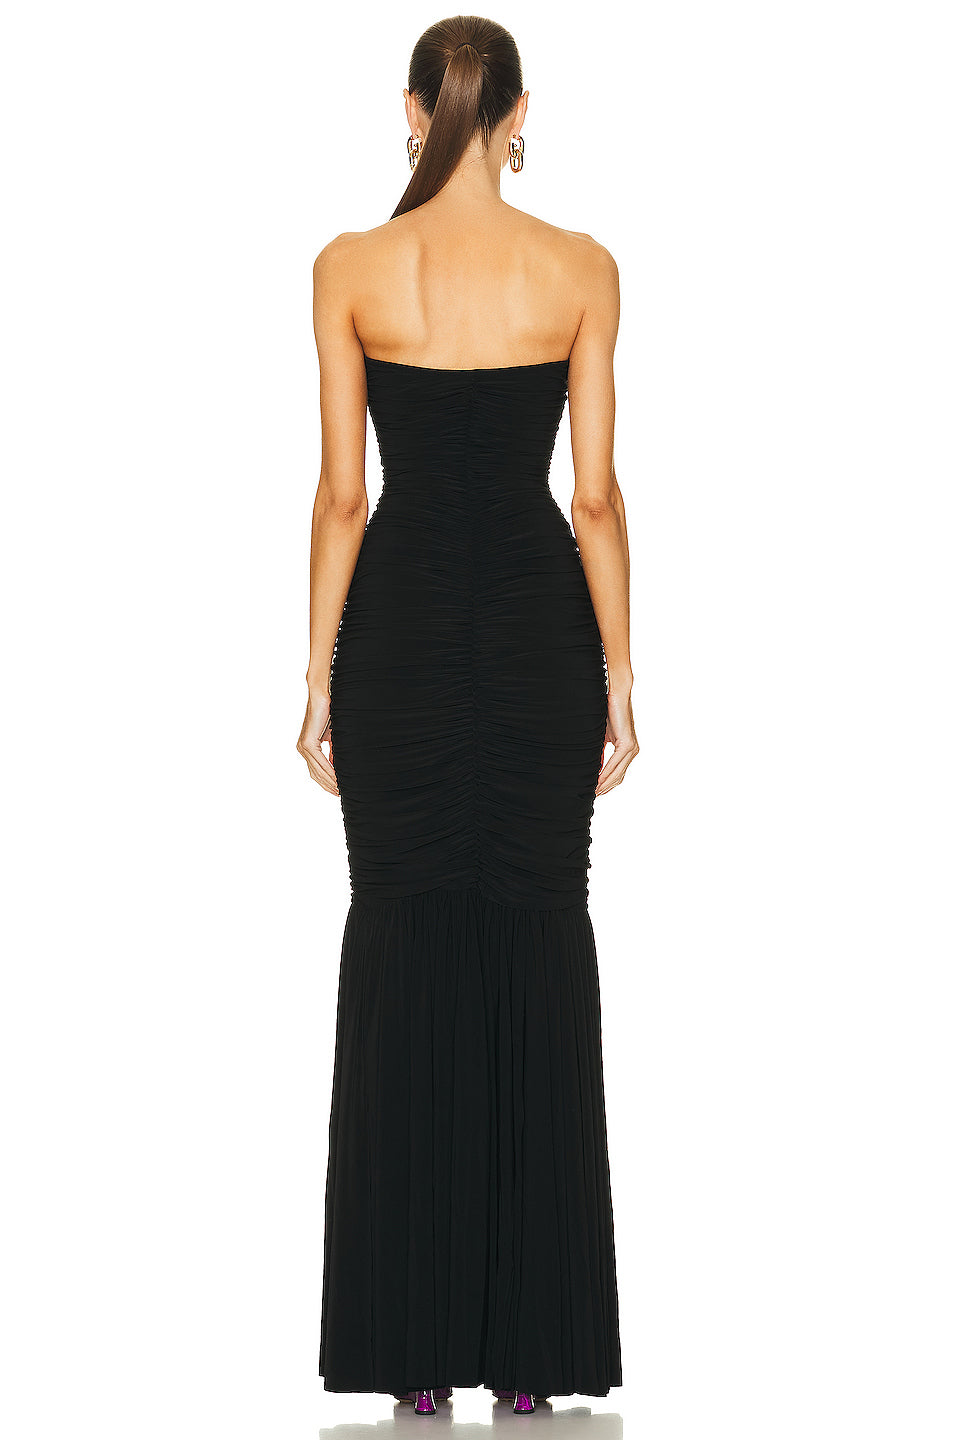 Slinky Fishtail Gown